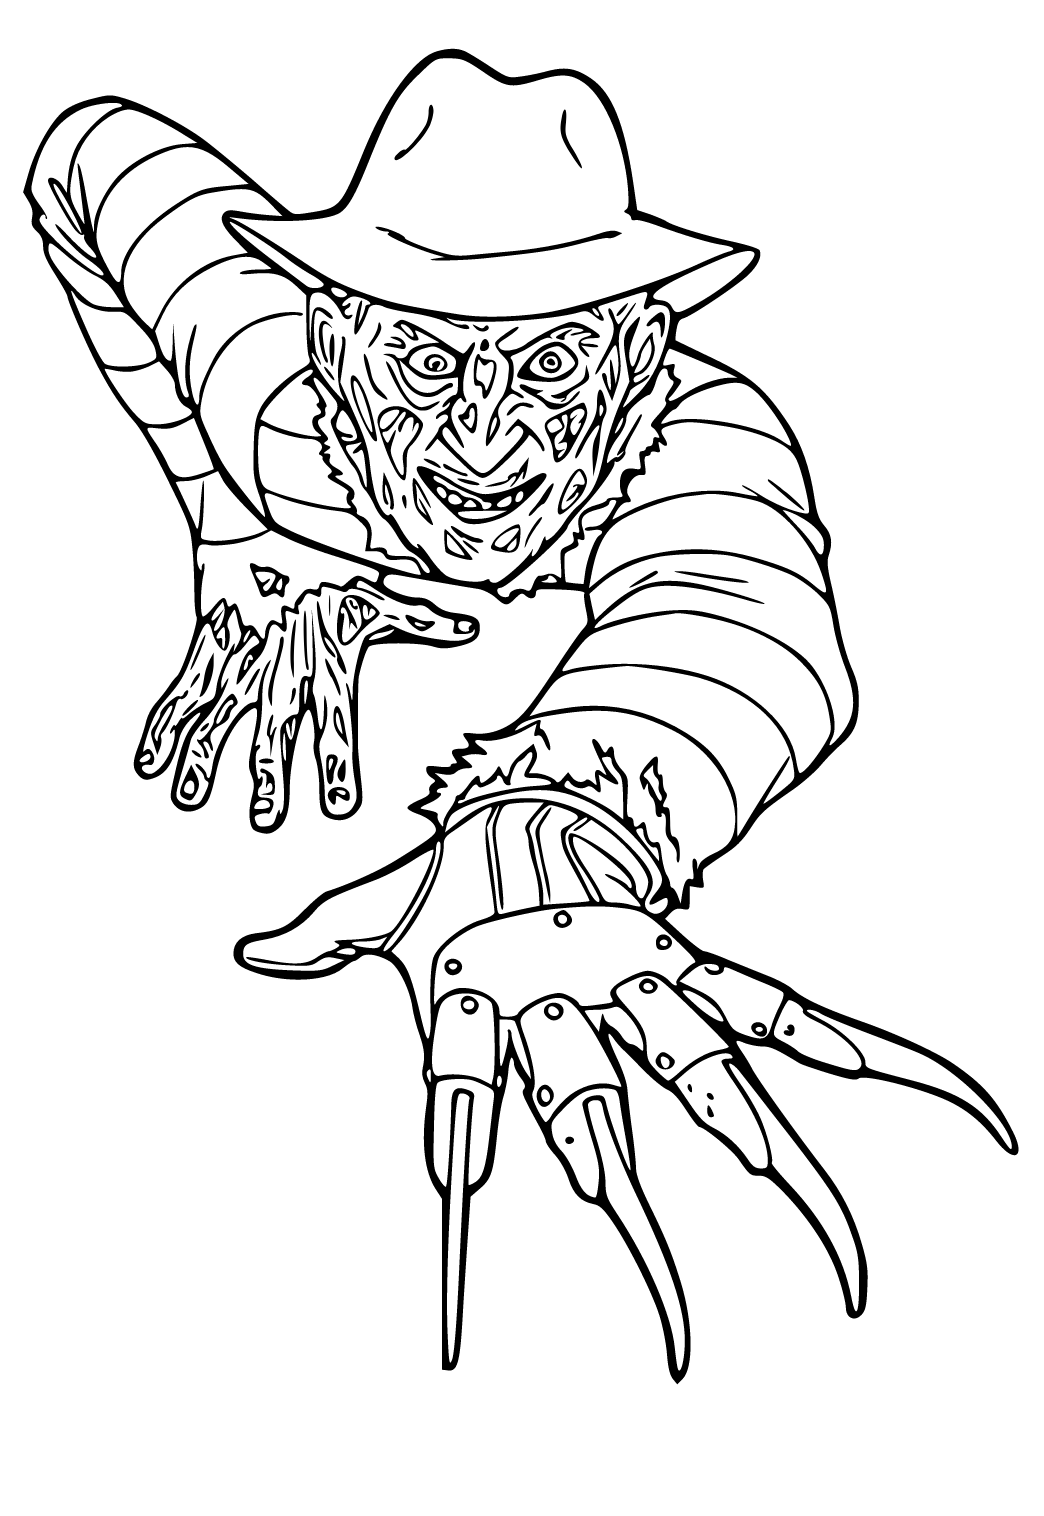 Free printable horror freddy krueger coloring page for adults and kids